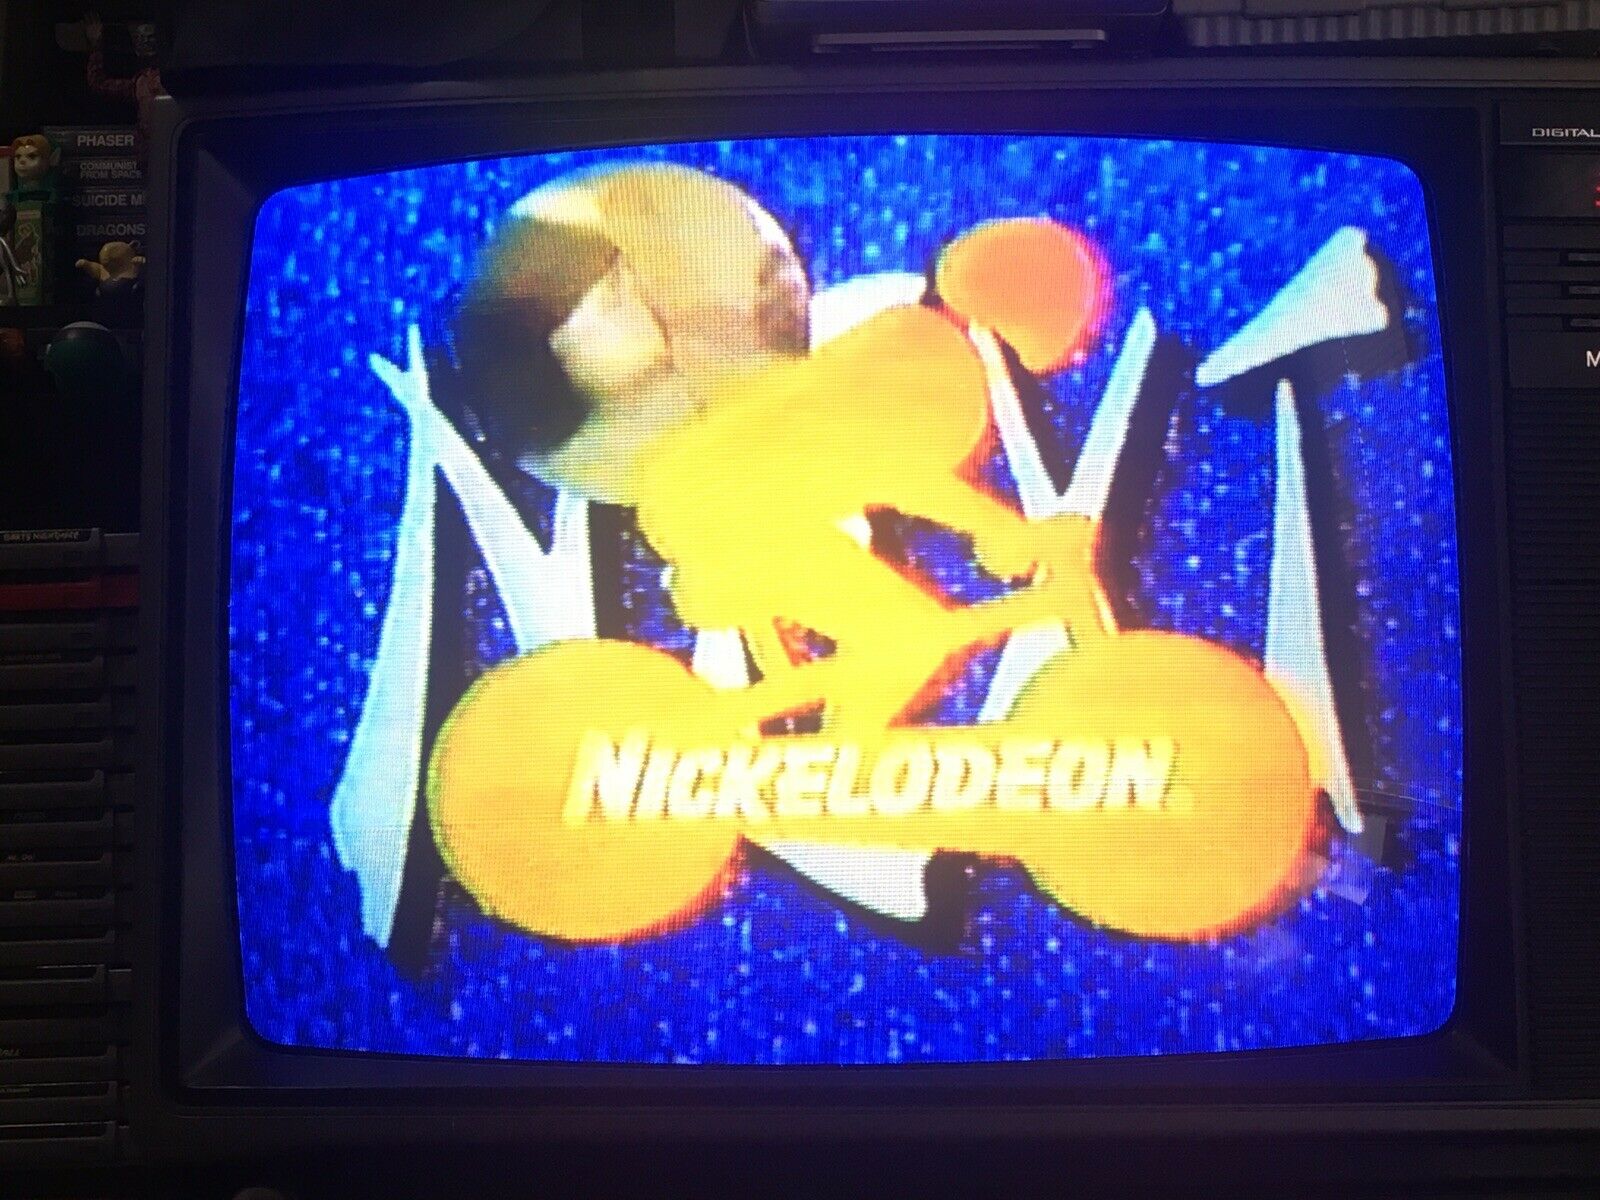 Nickelodeon 90s Vhs Sold As Blank Commercials Nick Clarissa Wild Crazy Gadget